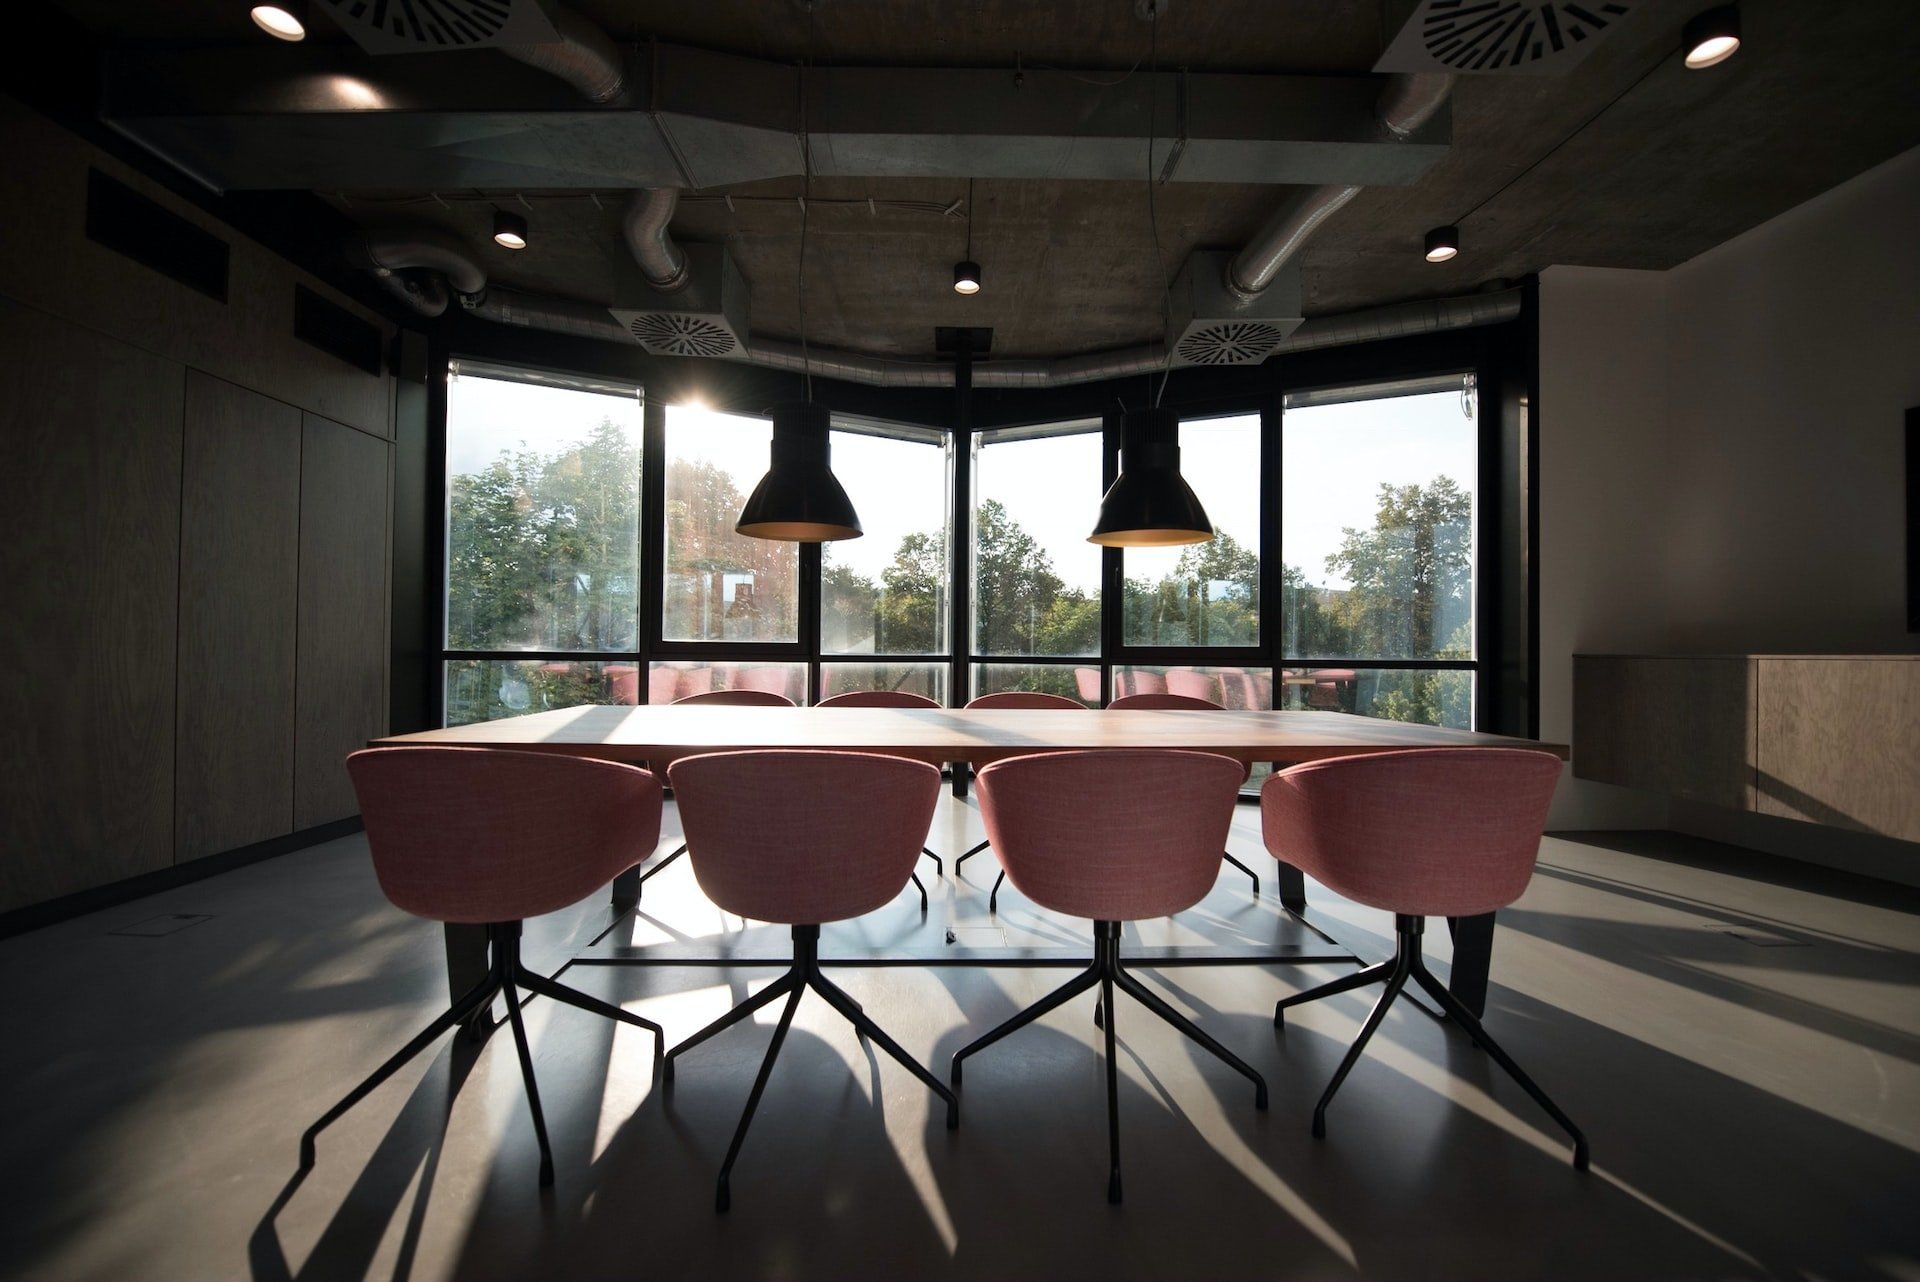 Boardroom table in front of a window